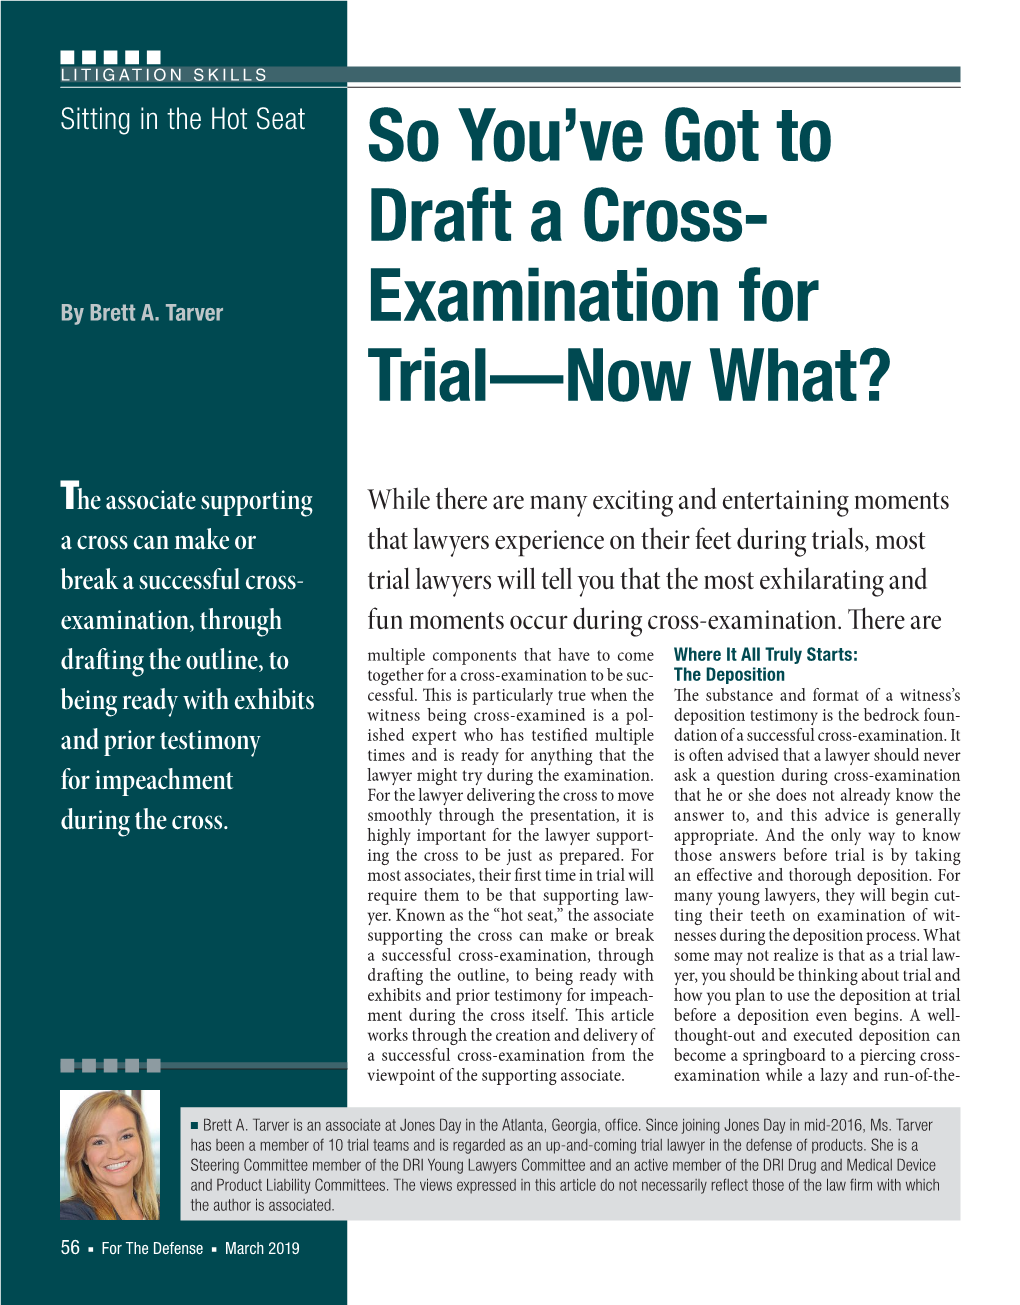 So You've Got to Draft a Cross- Examination for Trial—Now What?